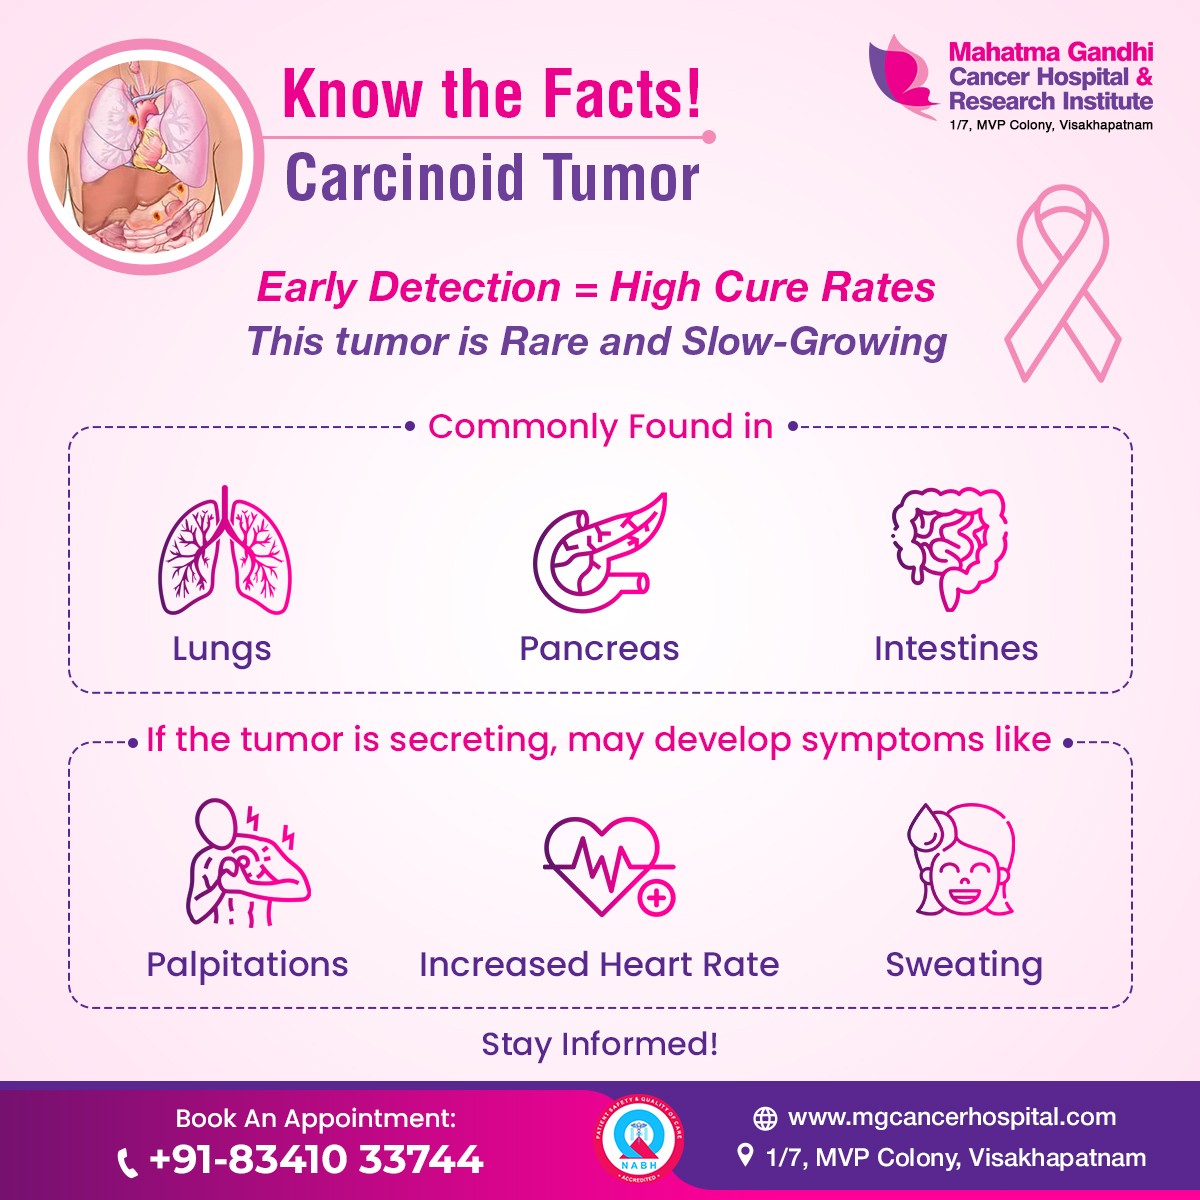 Understand the truth about Carcinoid Tumors! 
Early detection leads to high cure rates. Recognize symptoms, stay informed, and empower yourself against Carcinoid Tumors!
mgcancerhospital.com 

#CarcinoidTumor #NeuroendocrineTumor #CarcinoidAwareness
#NETCancer #RareDisease